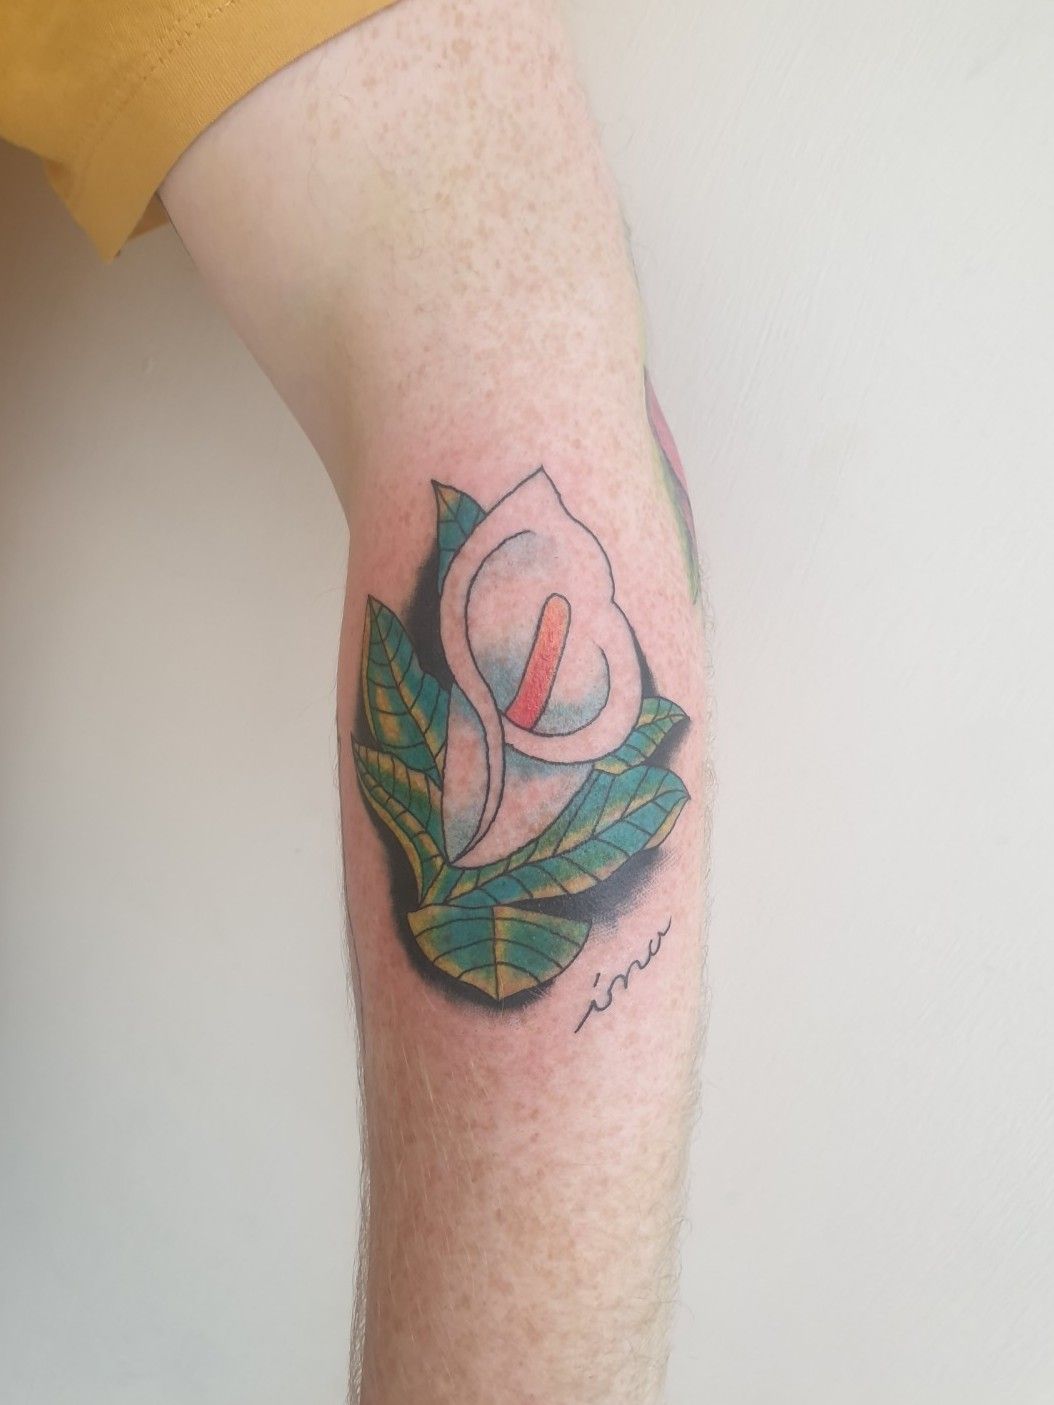 Sean Gilbert Tattoos  Have a beautiful day Pretty Easter lily to start  off this floral bouquet project No edit No filter Tattooed with  truehealtattoocare tattoo salve and aftercare zimitartattoo tattoo  cartridges 